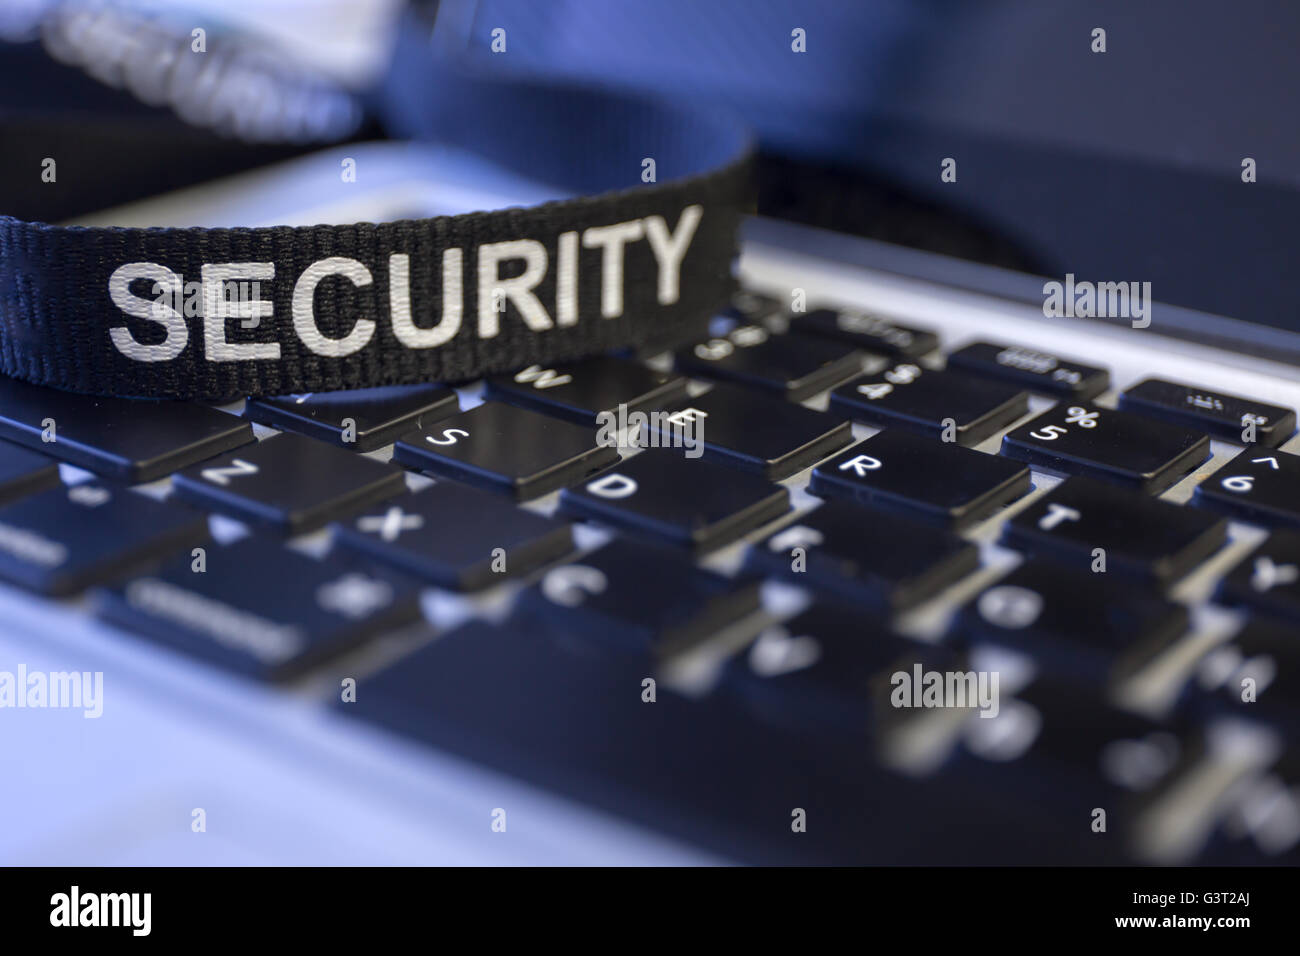 word security on labtop keyboard symbolized fraud and computer crime protection Stock Photo